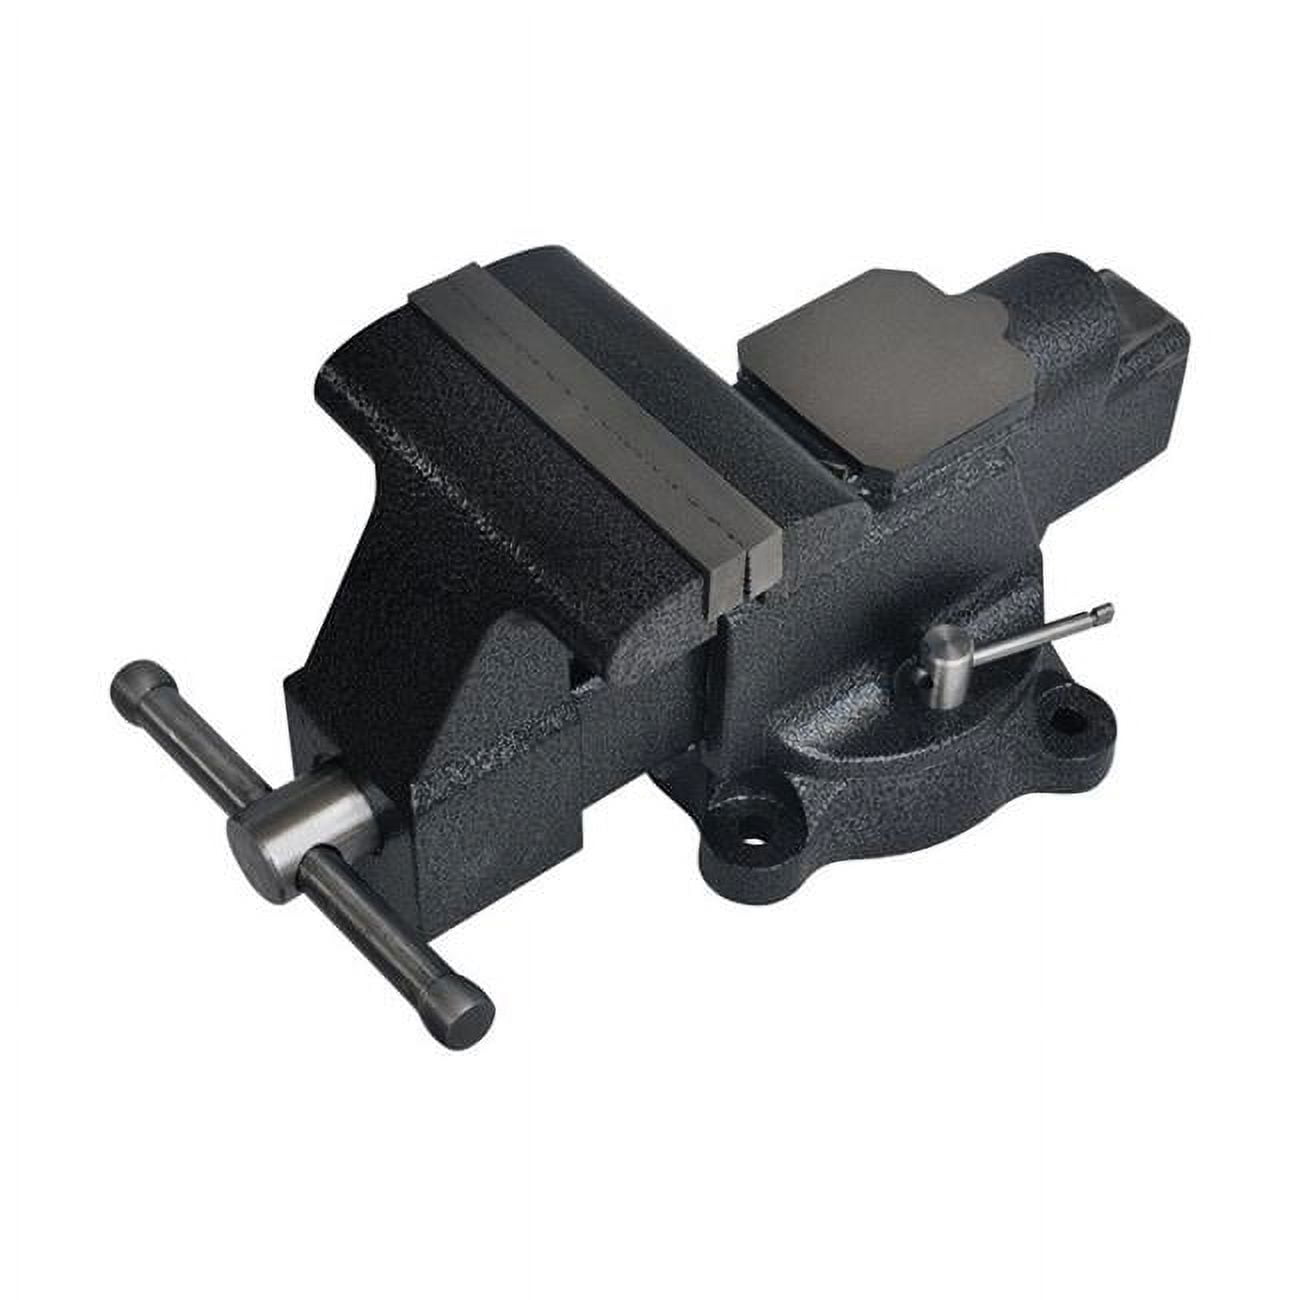 2796860 6 in. Forged Steel Bench Vise with Swivel Base, Black -  Steel Grip, DR76517